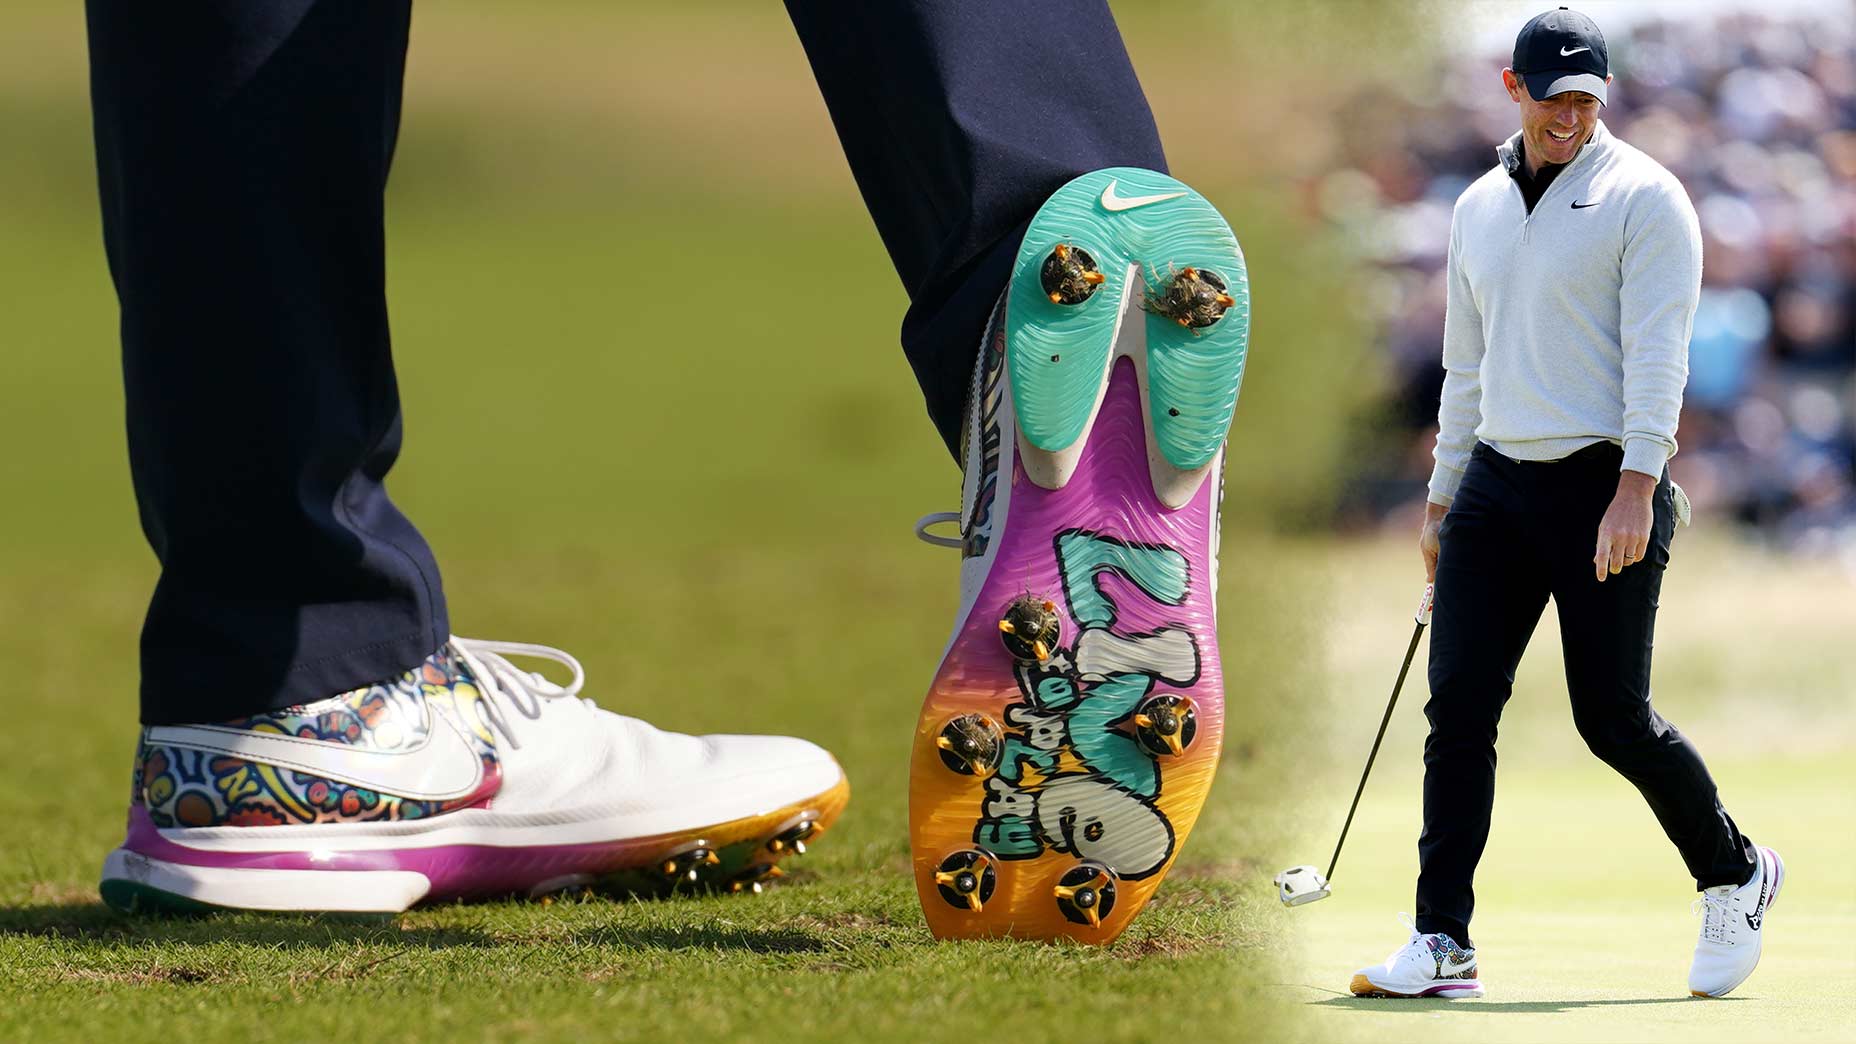 Get these popular Nike golf shoes at The Open before your size sells out